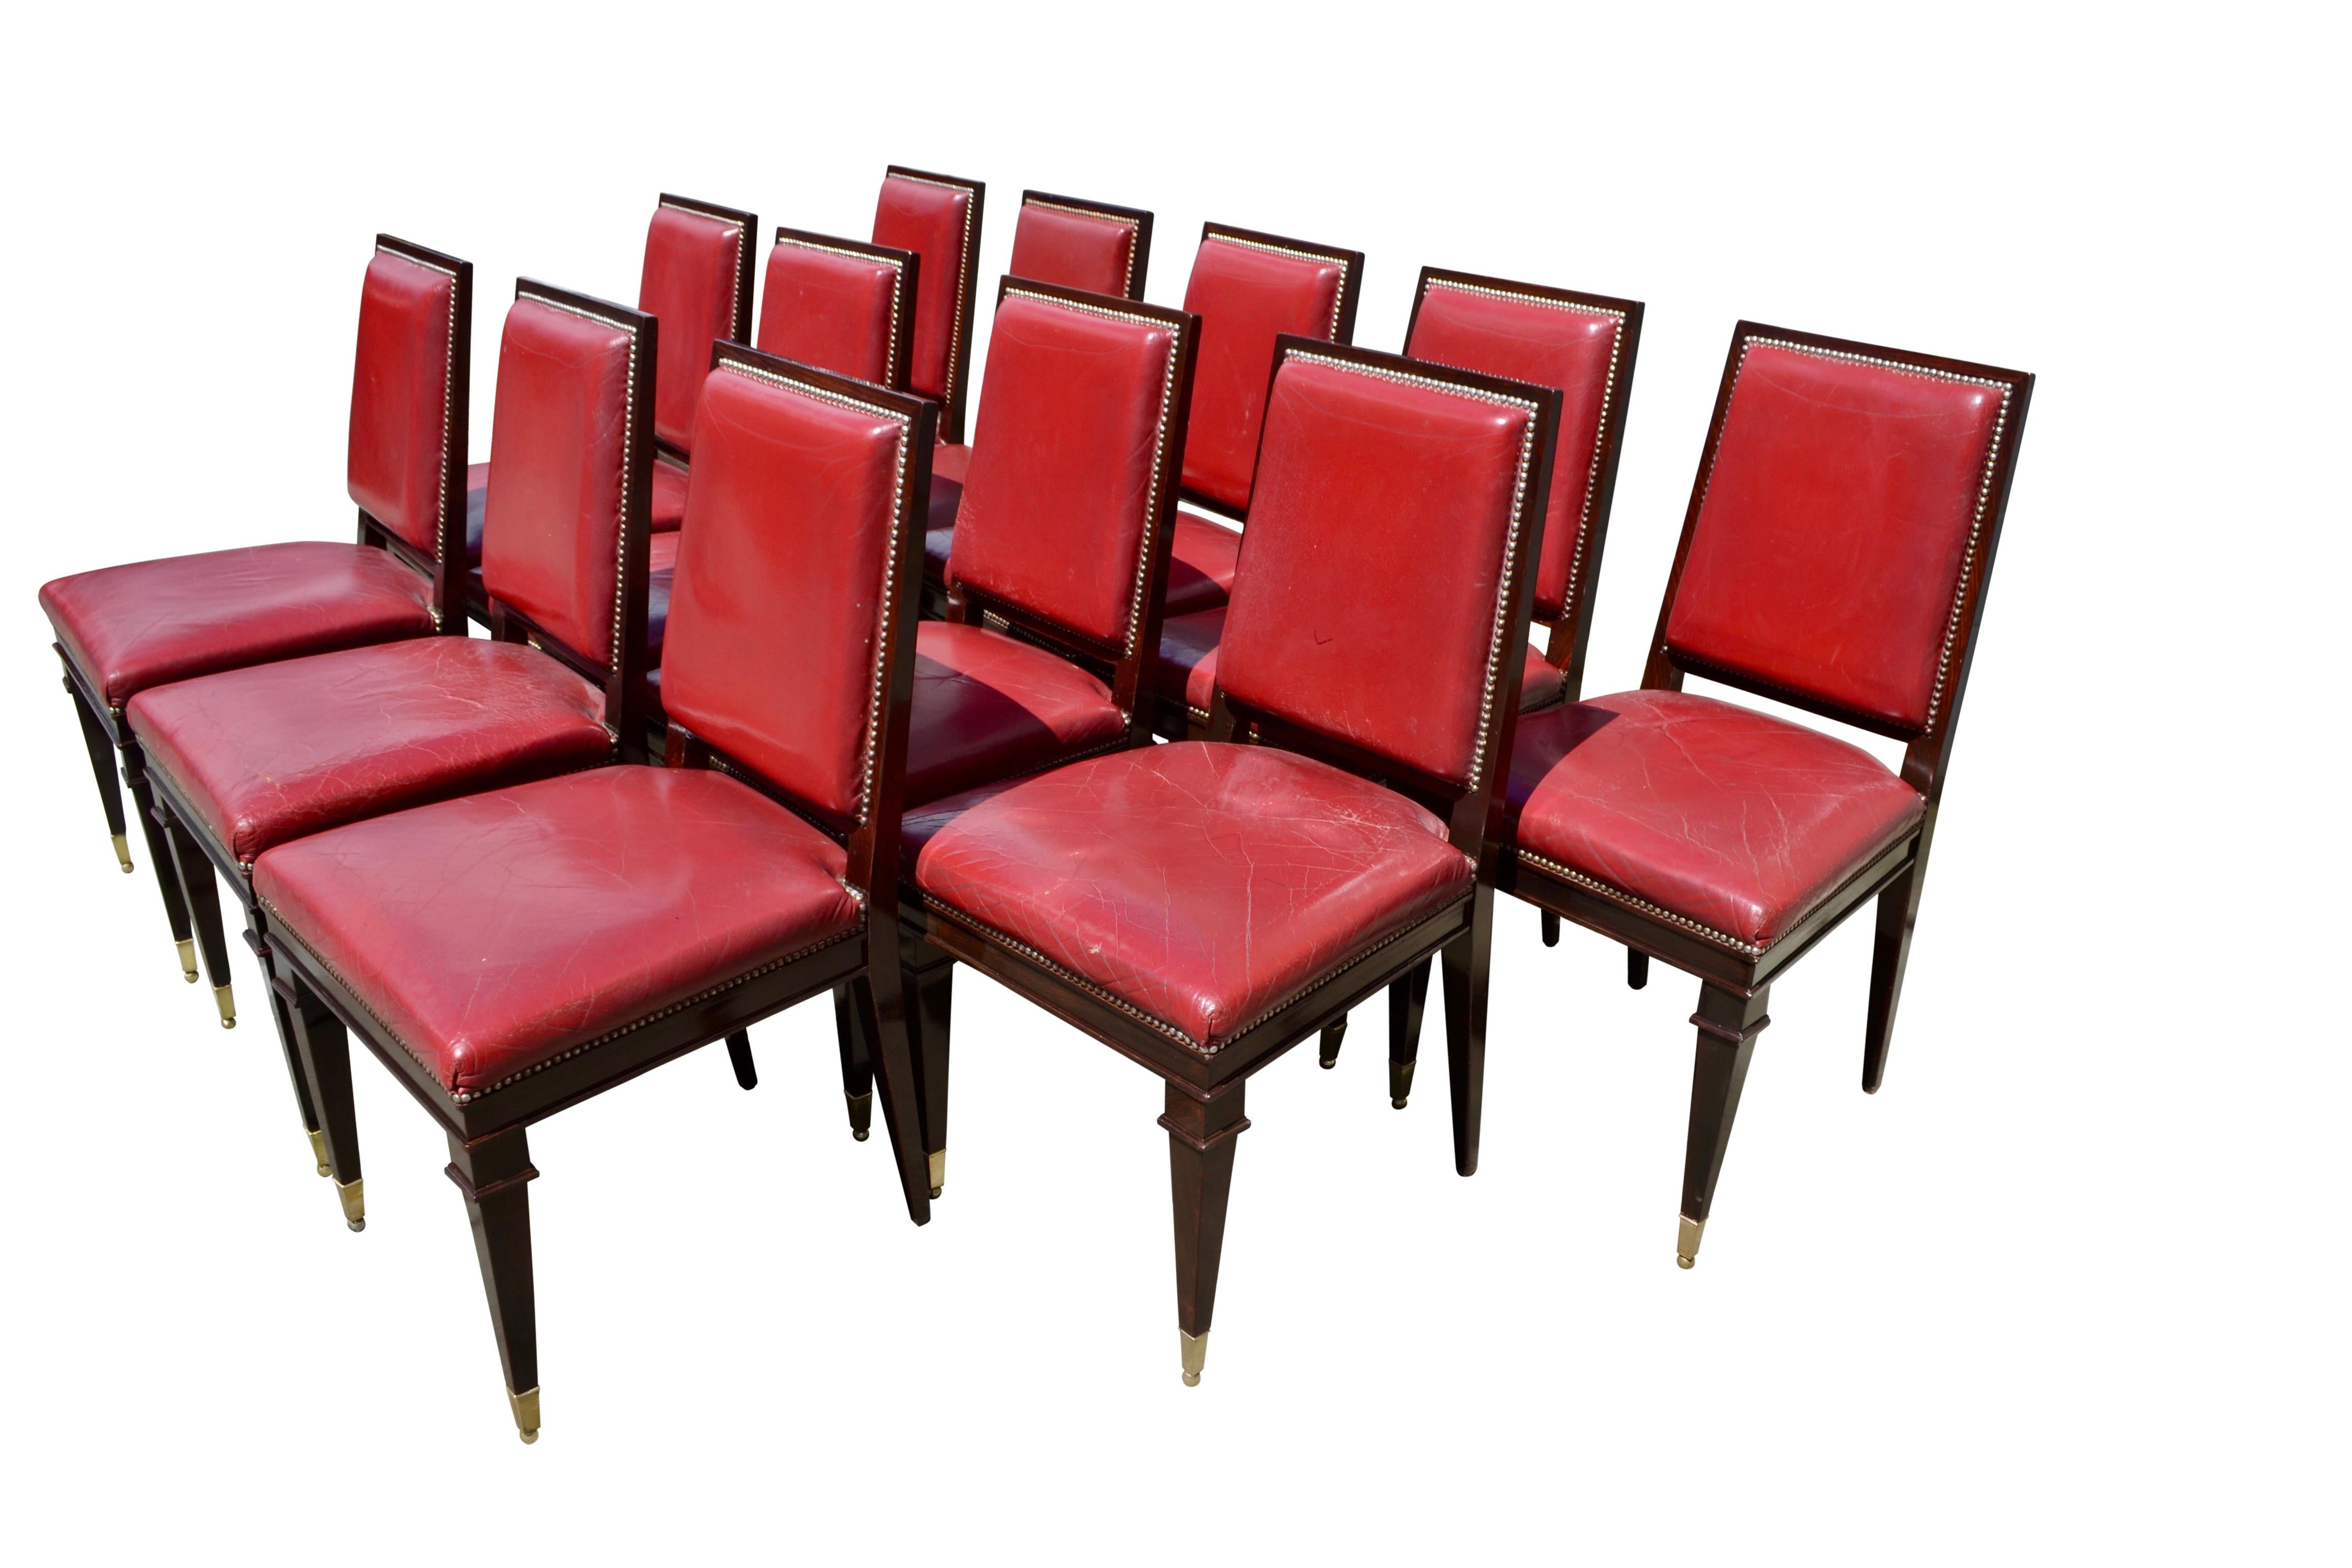 20th Century Set of 12 Art Deco Mahogany Framed Red Leather Chairs For Sale